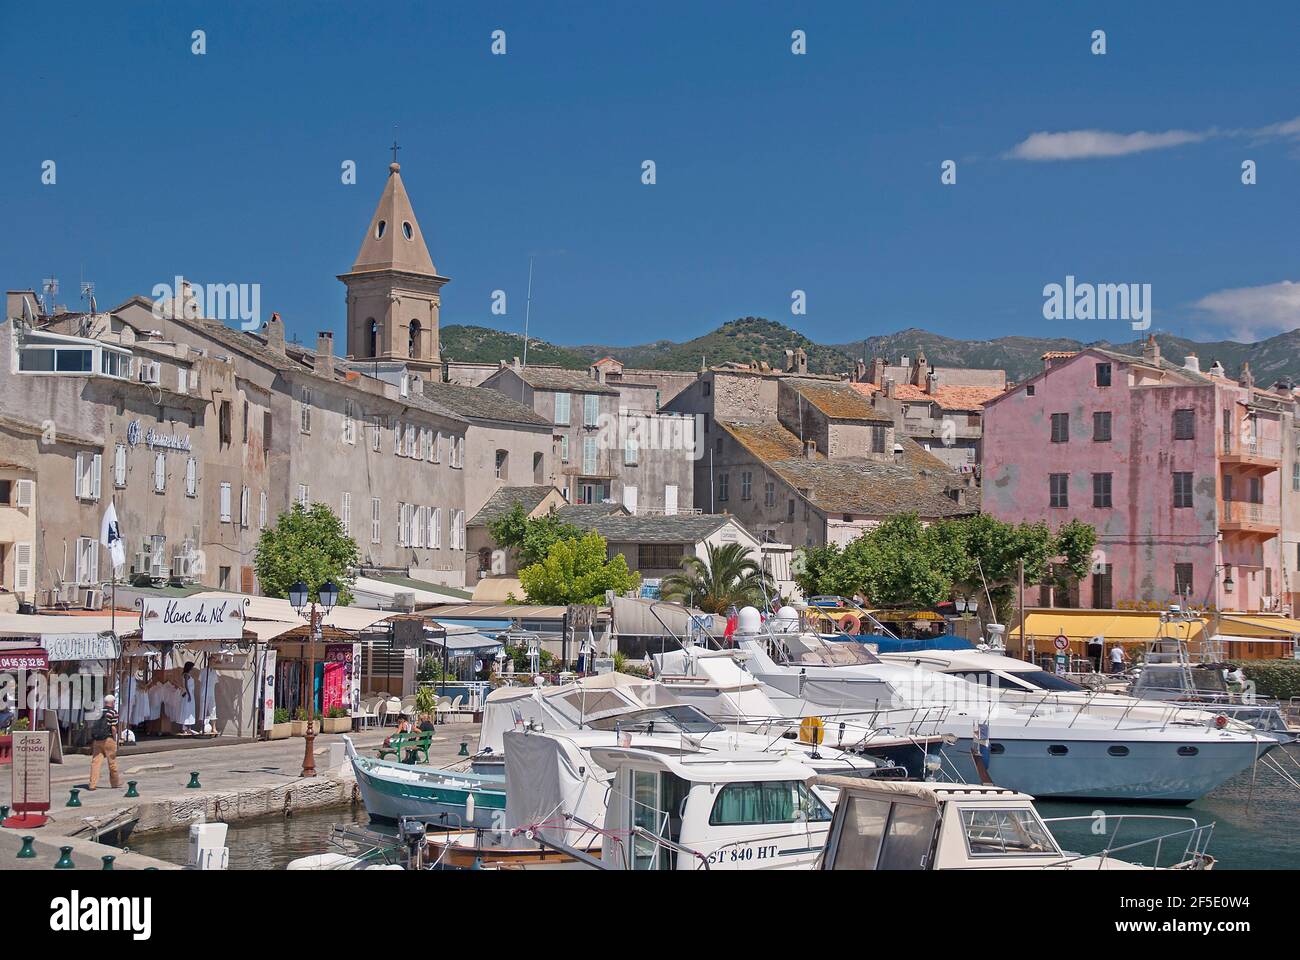 St Florent in Corsica: the town and harbour Stock Photo